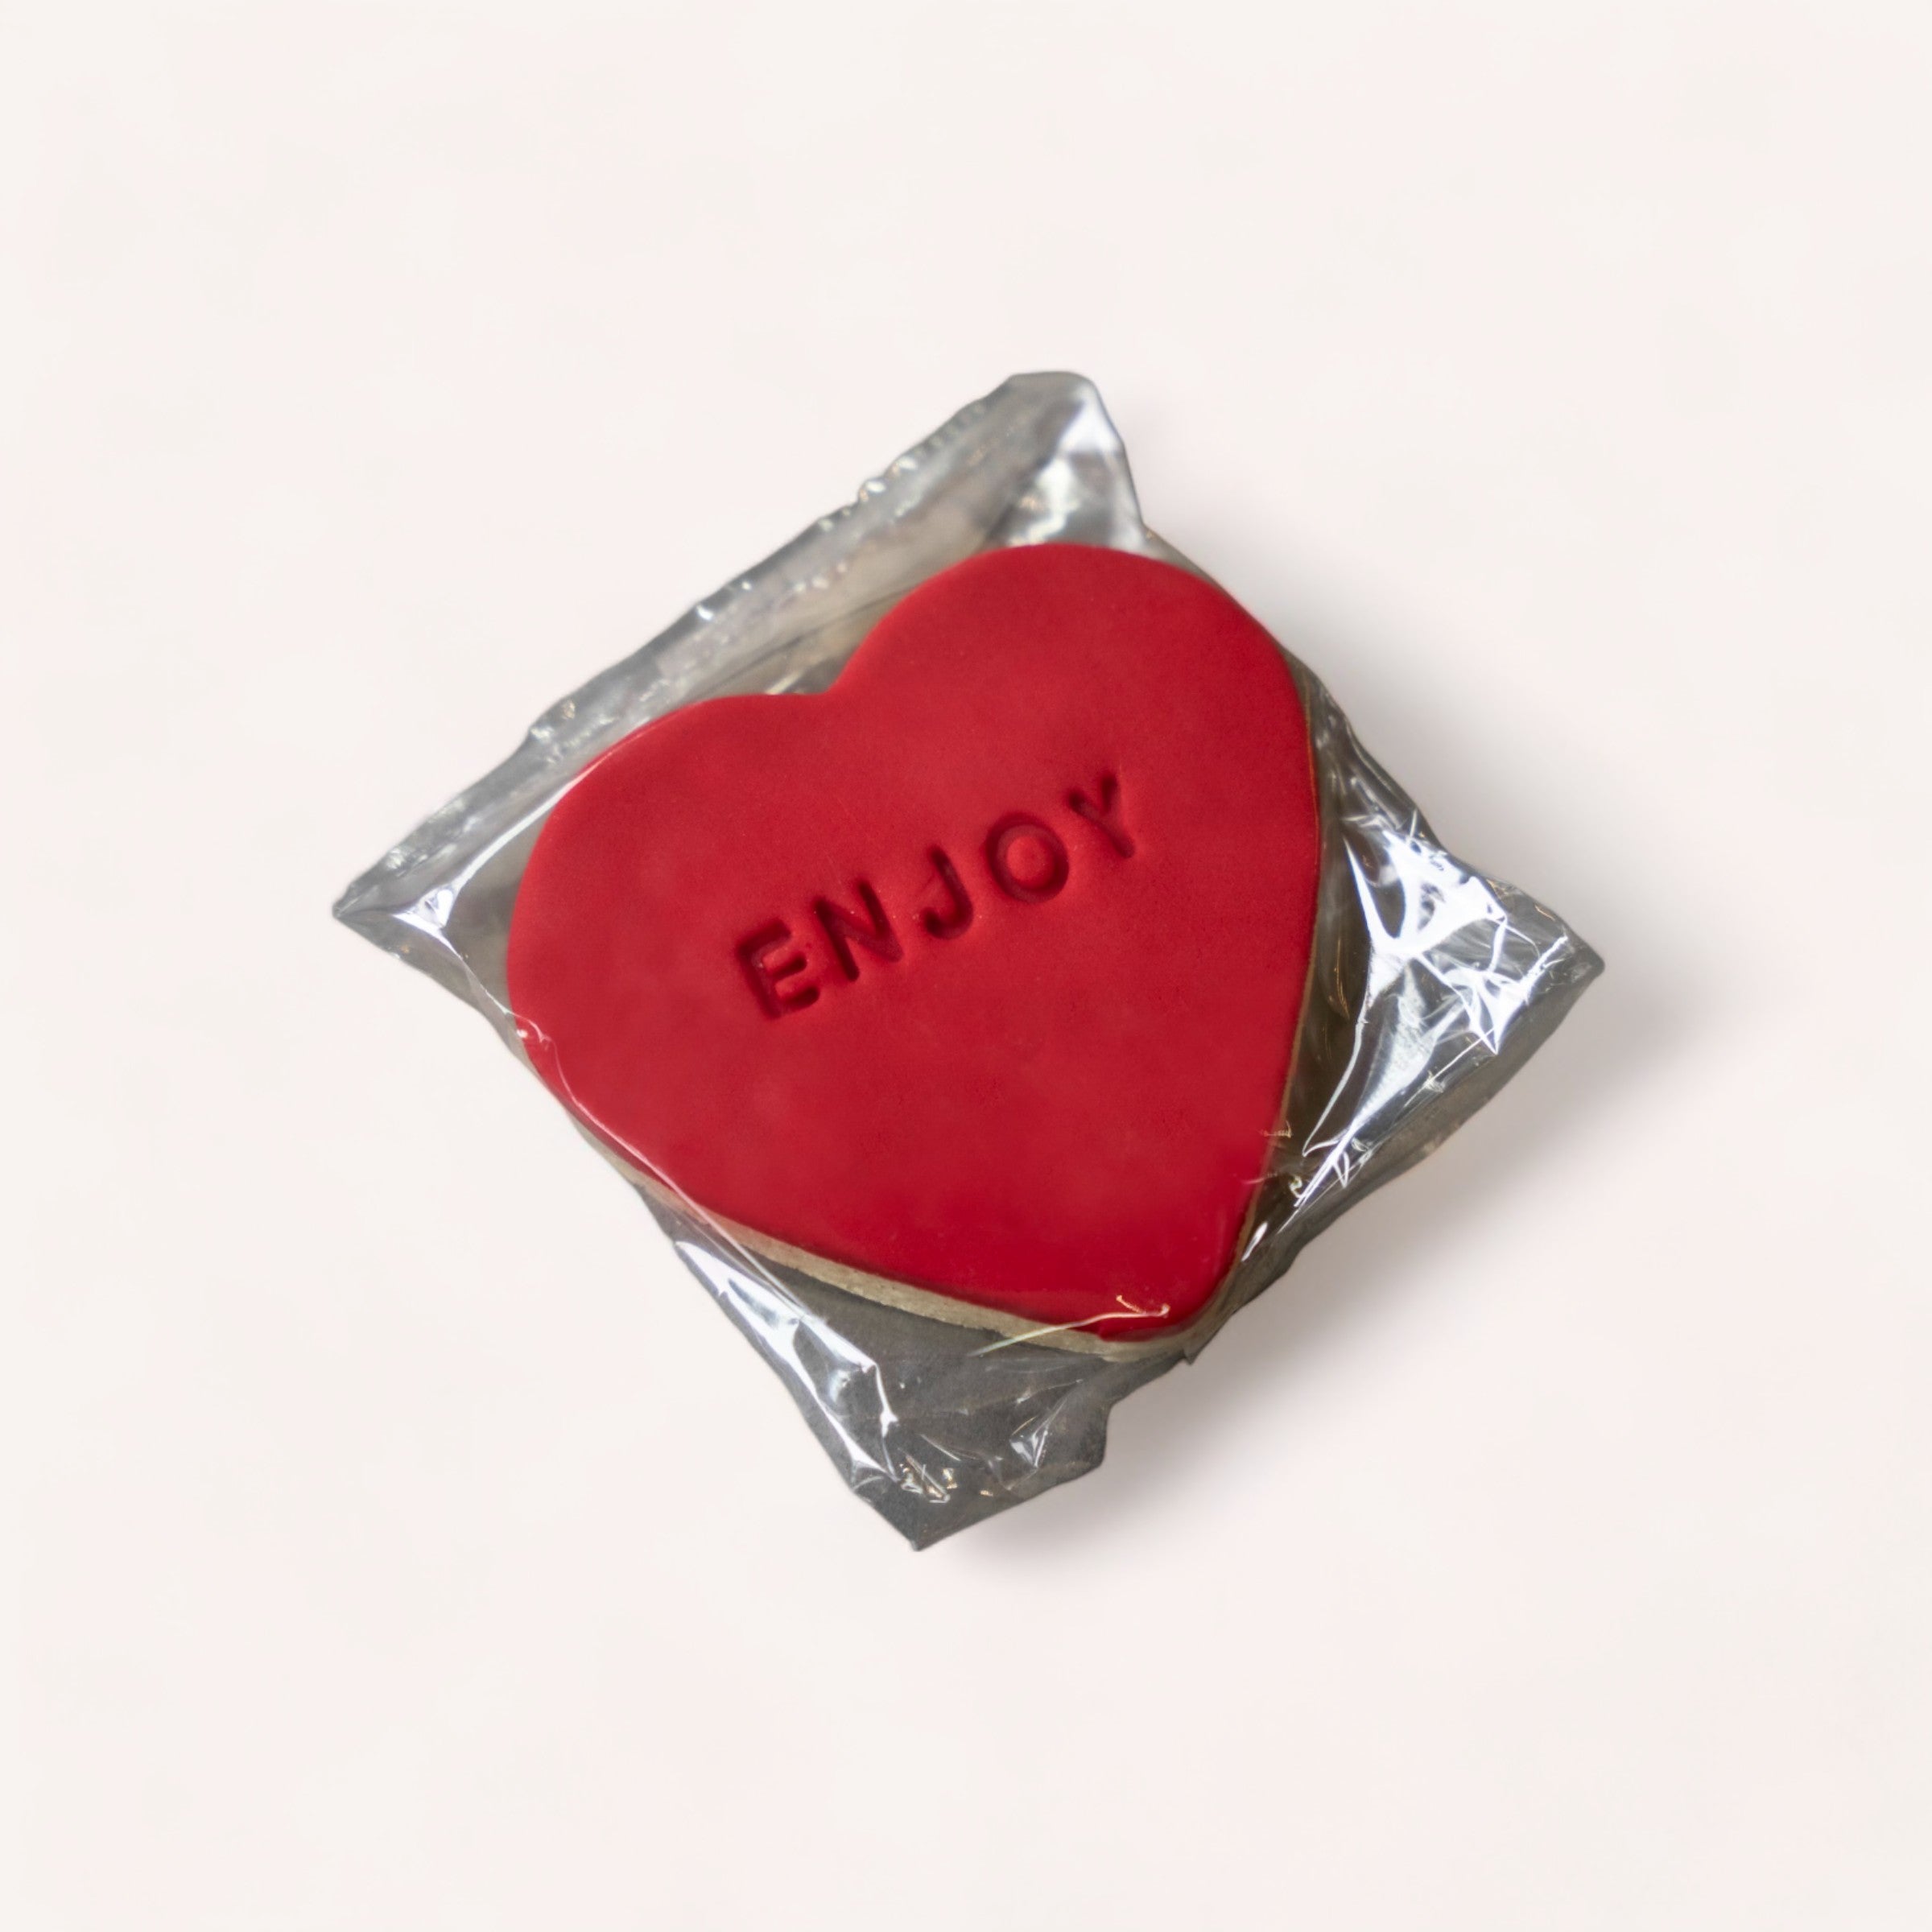 A heart-shaped red candy with the word "enjoy" embossed on it, wrapped partially in silver foil against a soft white background, making it a heartfelt gift.
Product Name: Heart 'Enjoy' Cookie
Brand Name: The Cookie Collective